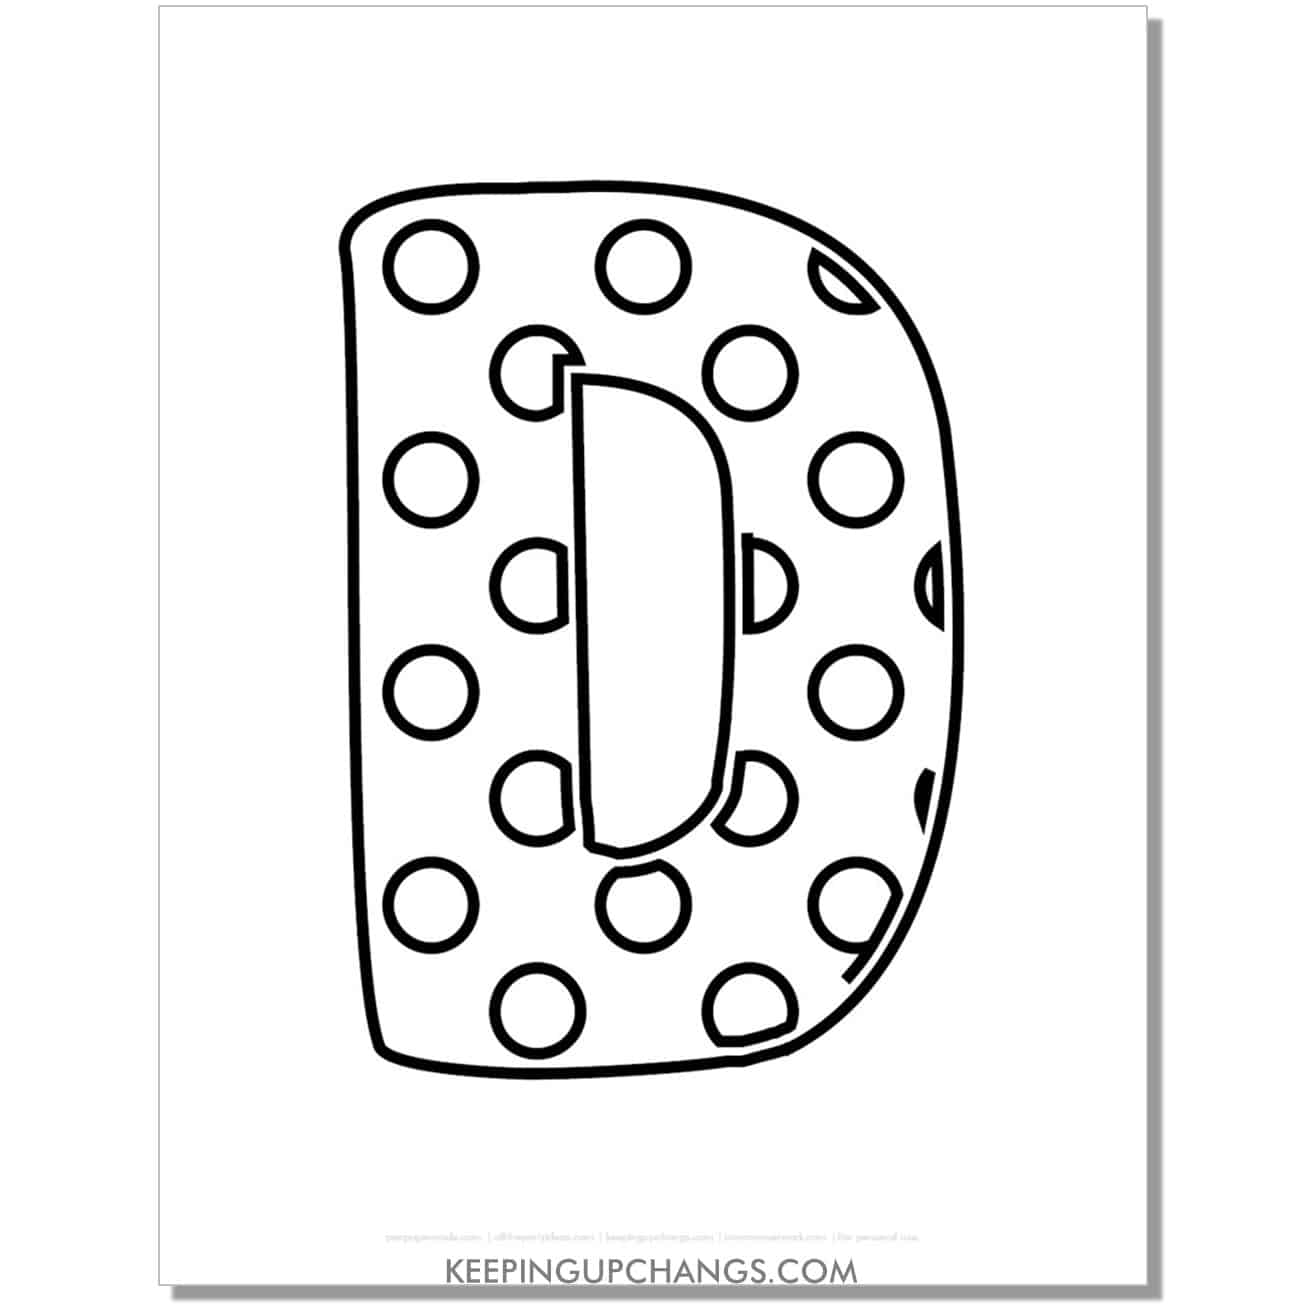 free alphabet letter d coloring page with polka dots for toddlers, preschool, kindergarten.